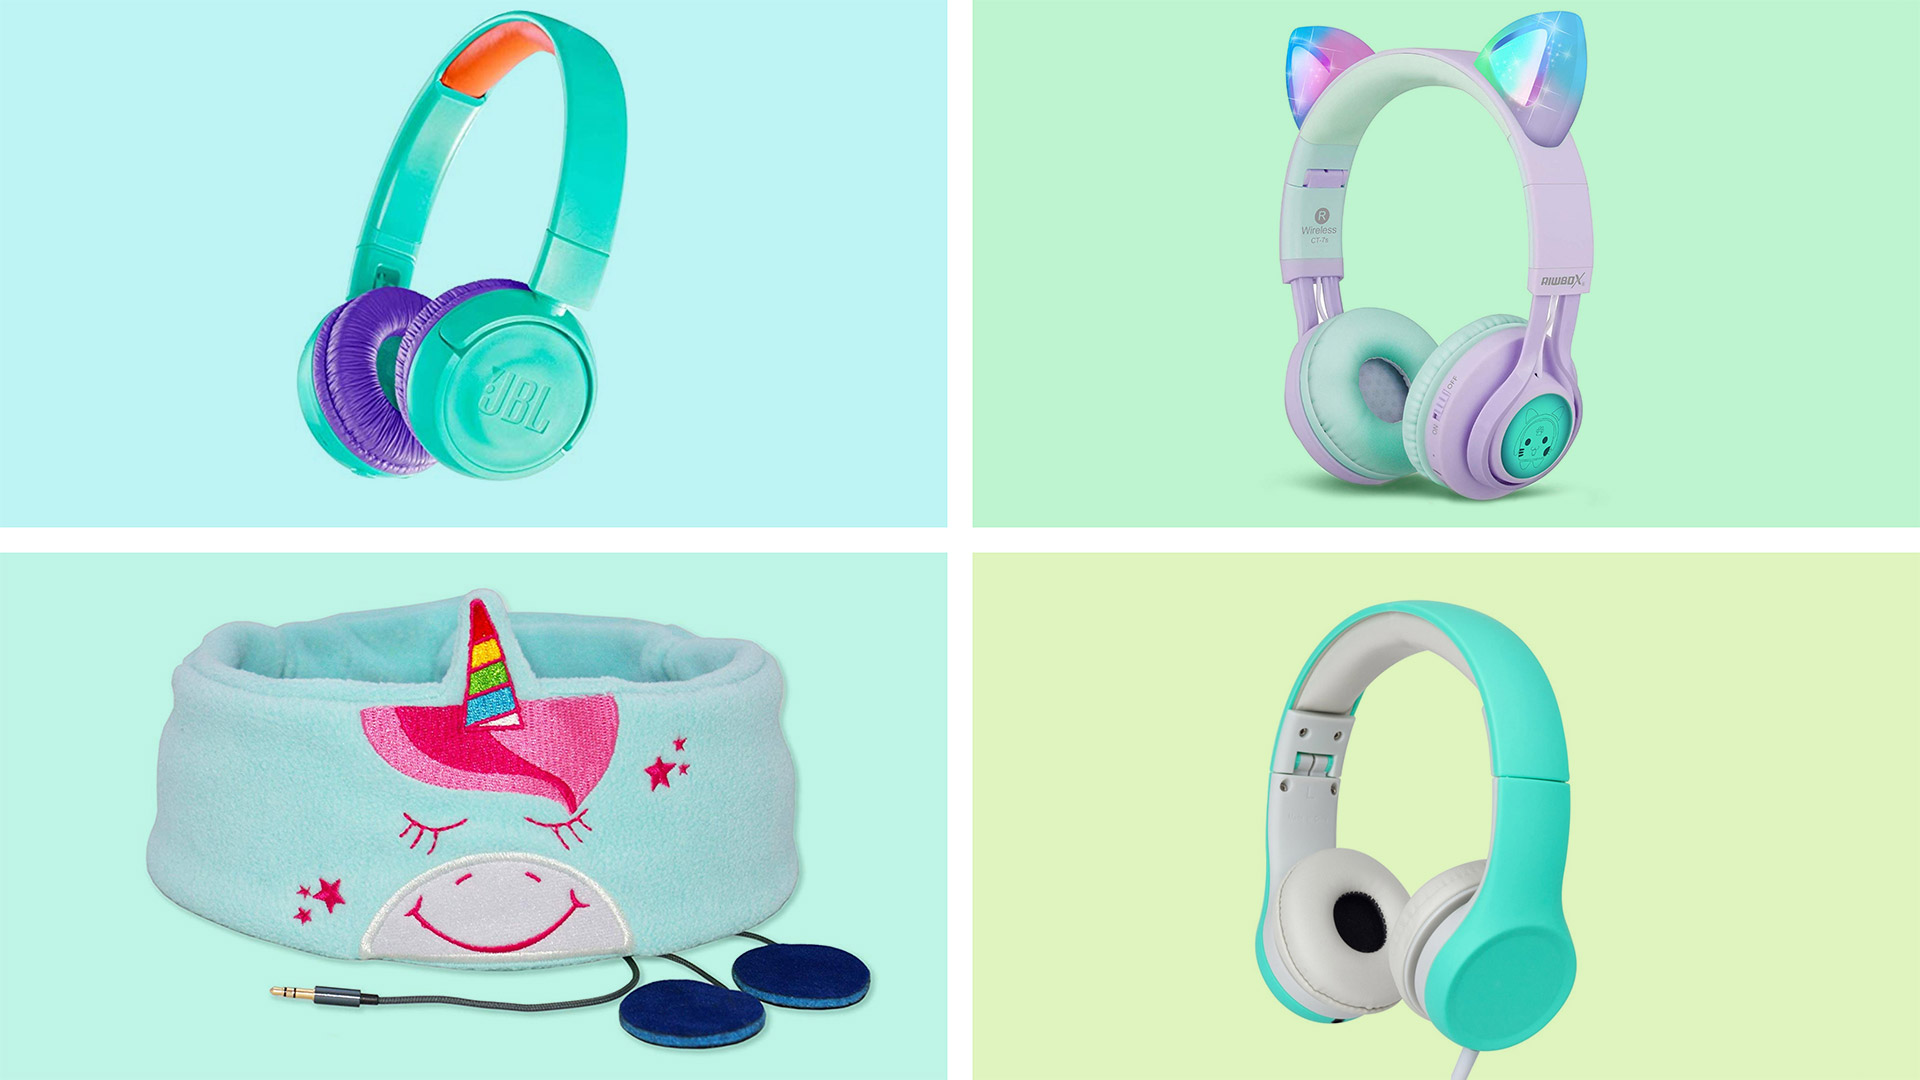  Lunii - Octave Headphones - For Kids From 3 To 8